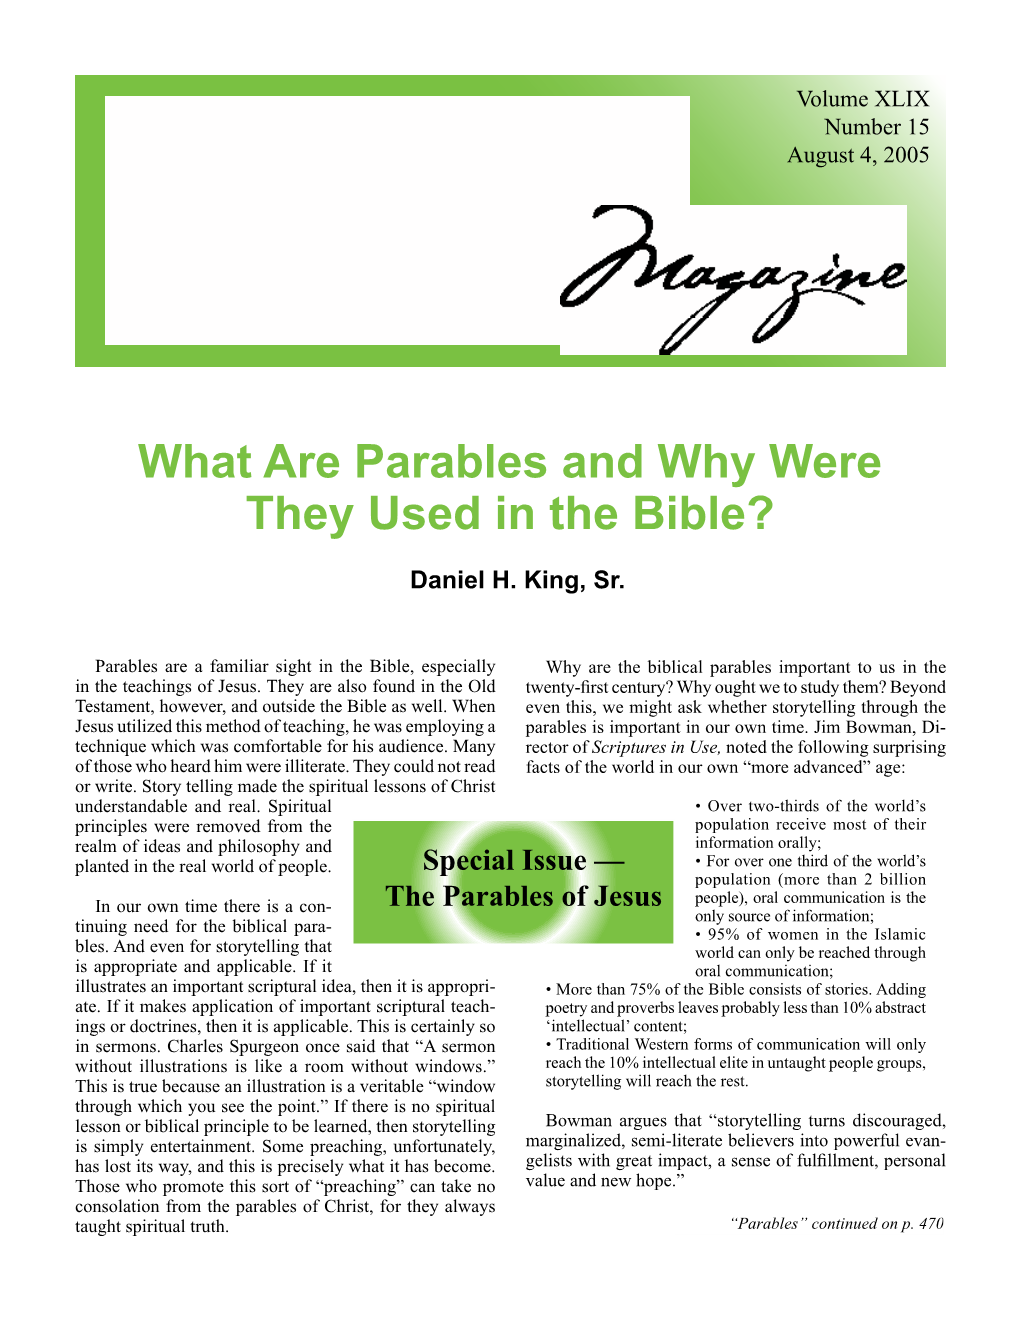 What Are Parables and Why Were They Used in the Bible?